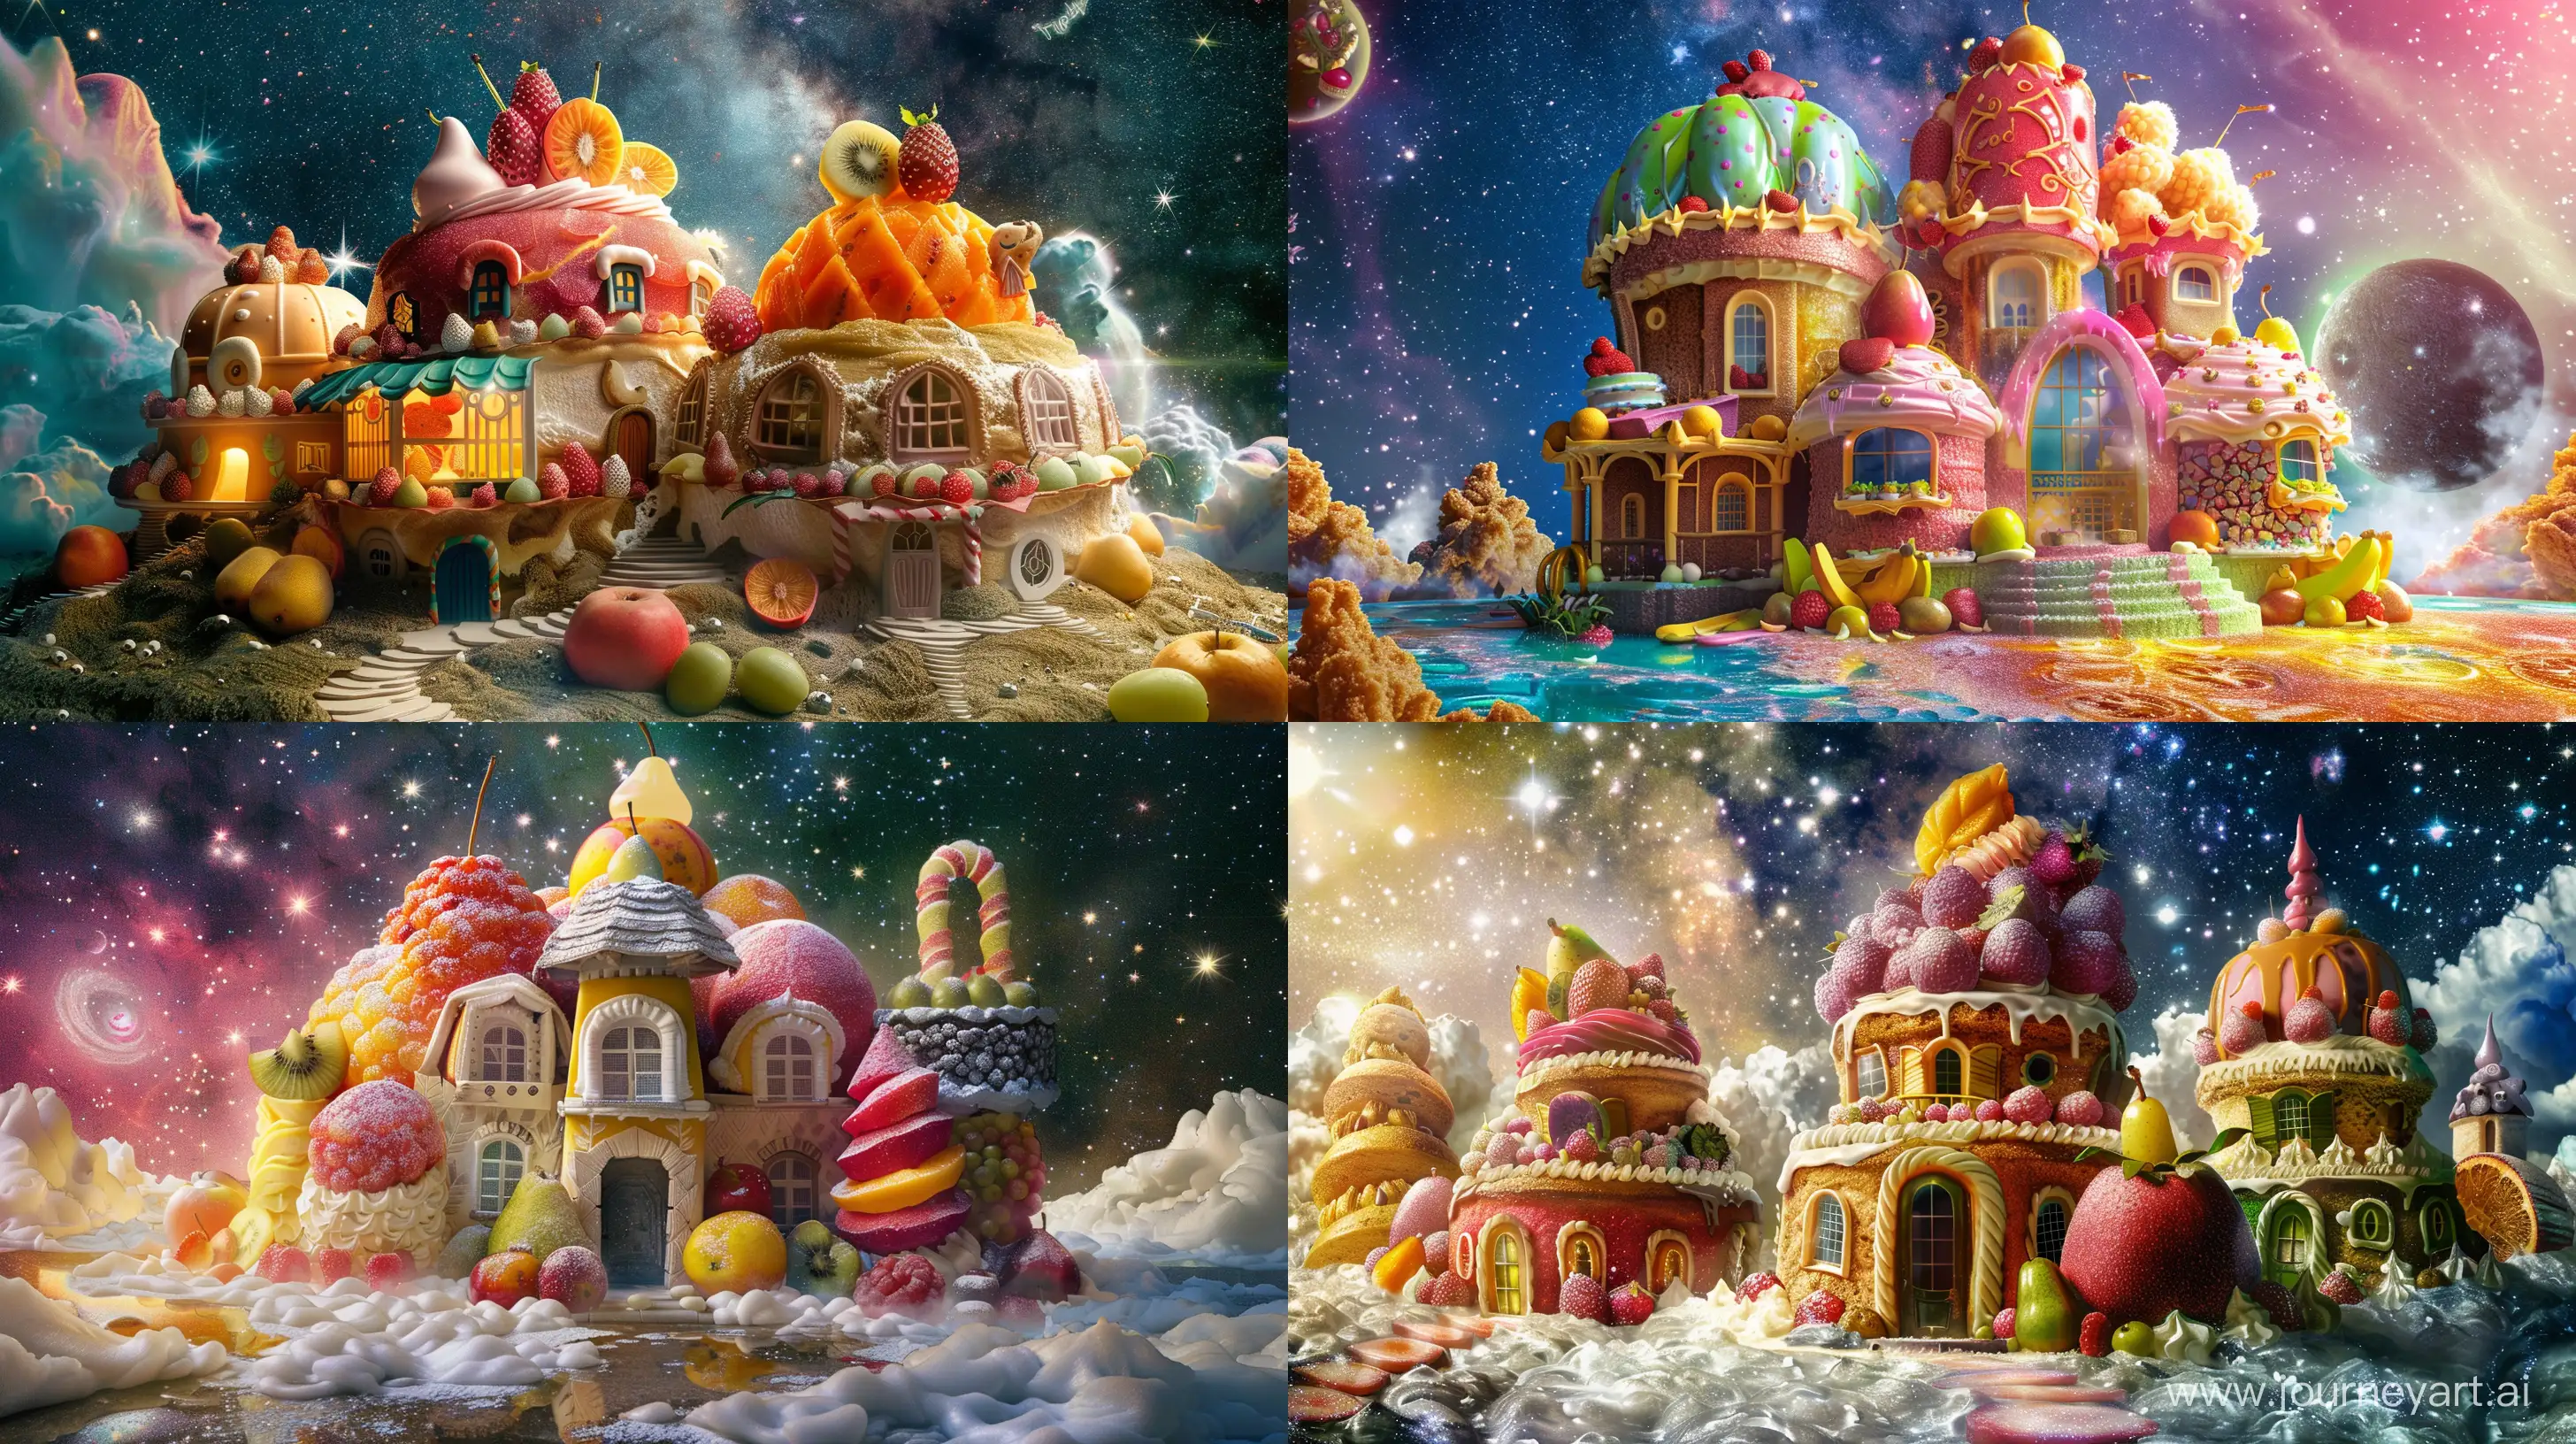 Fantasy-Galaxy-Mansion-Vibrant-Cake-and-Fruit-Architecture